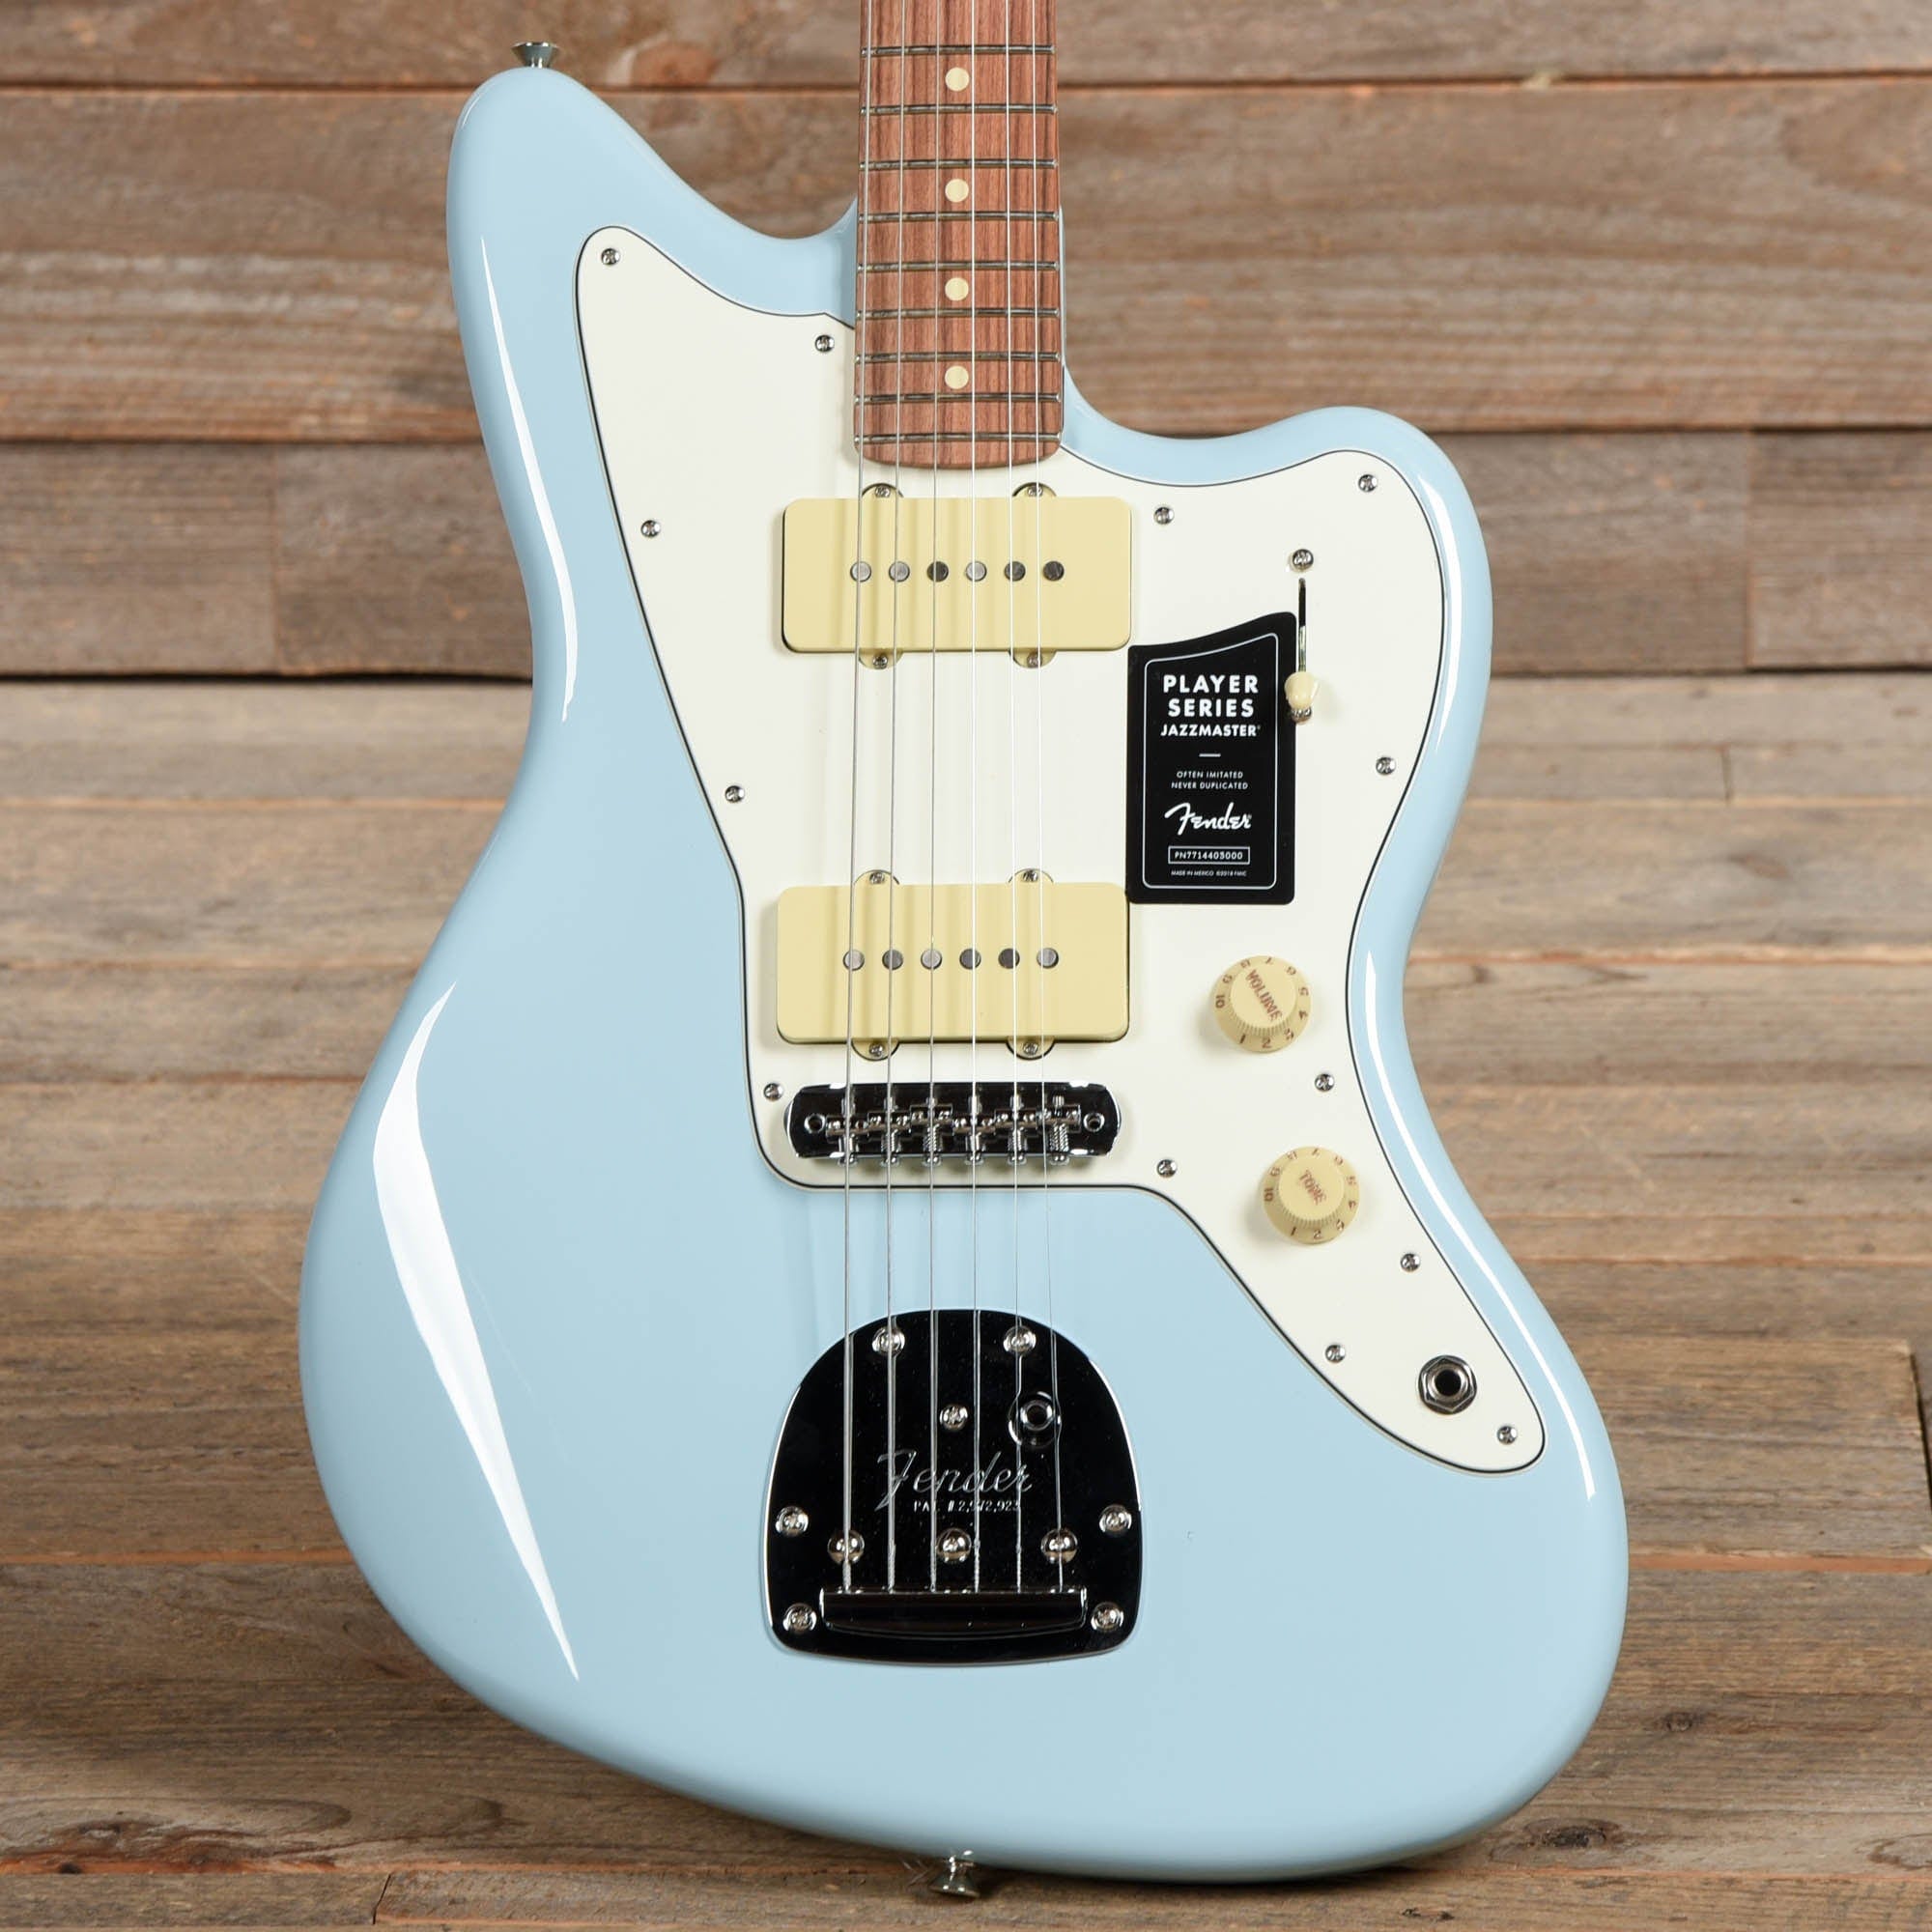 Fender Player Jazzmaster Sonic Blue w/Olympic White Headcap, Pure Vintage '65 Pickups, & Series/Parallel 4-Way Electric Guitars / Solid Body